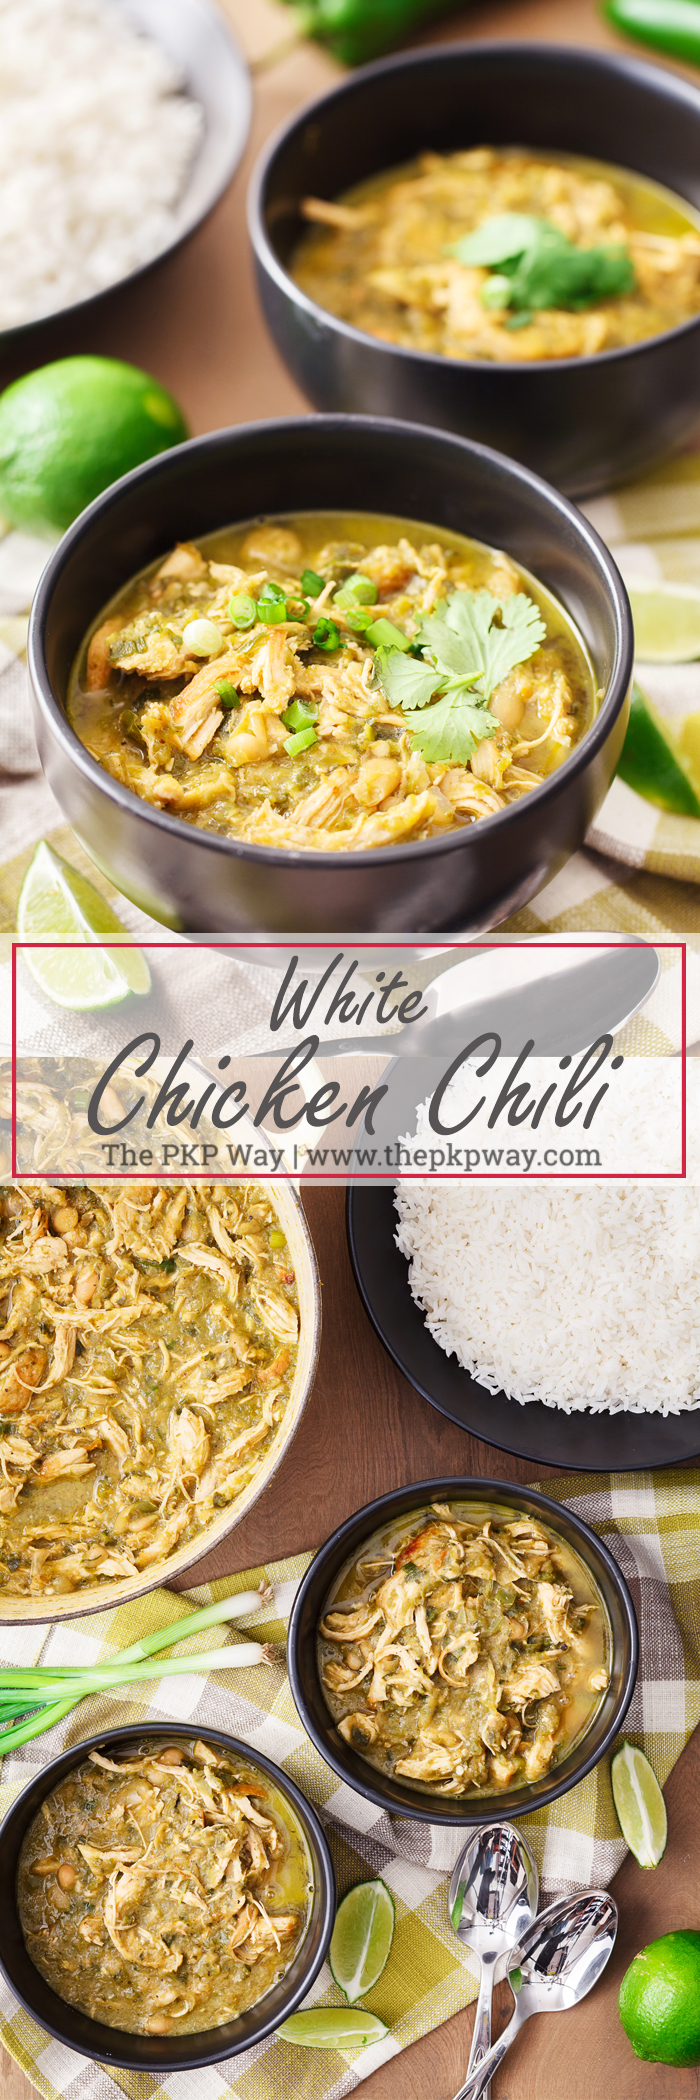 Thick and flavorful White Chicken Chili has THREE kinds of chilies and flavor-building steps for a mouthful of depth and complex flavors with every bite.